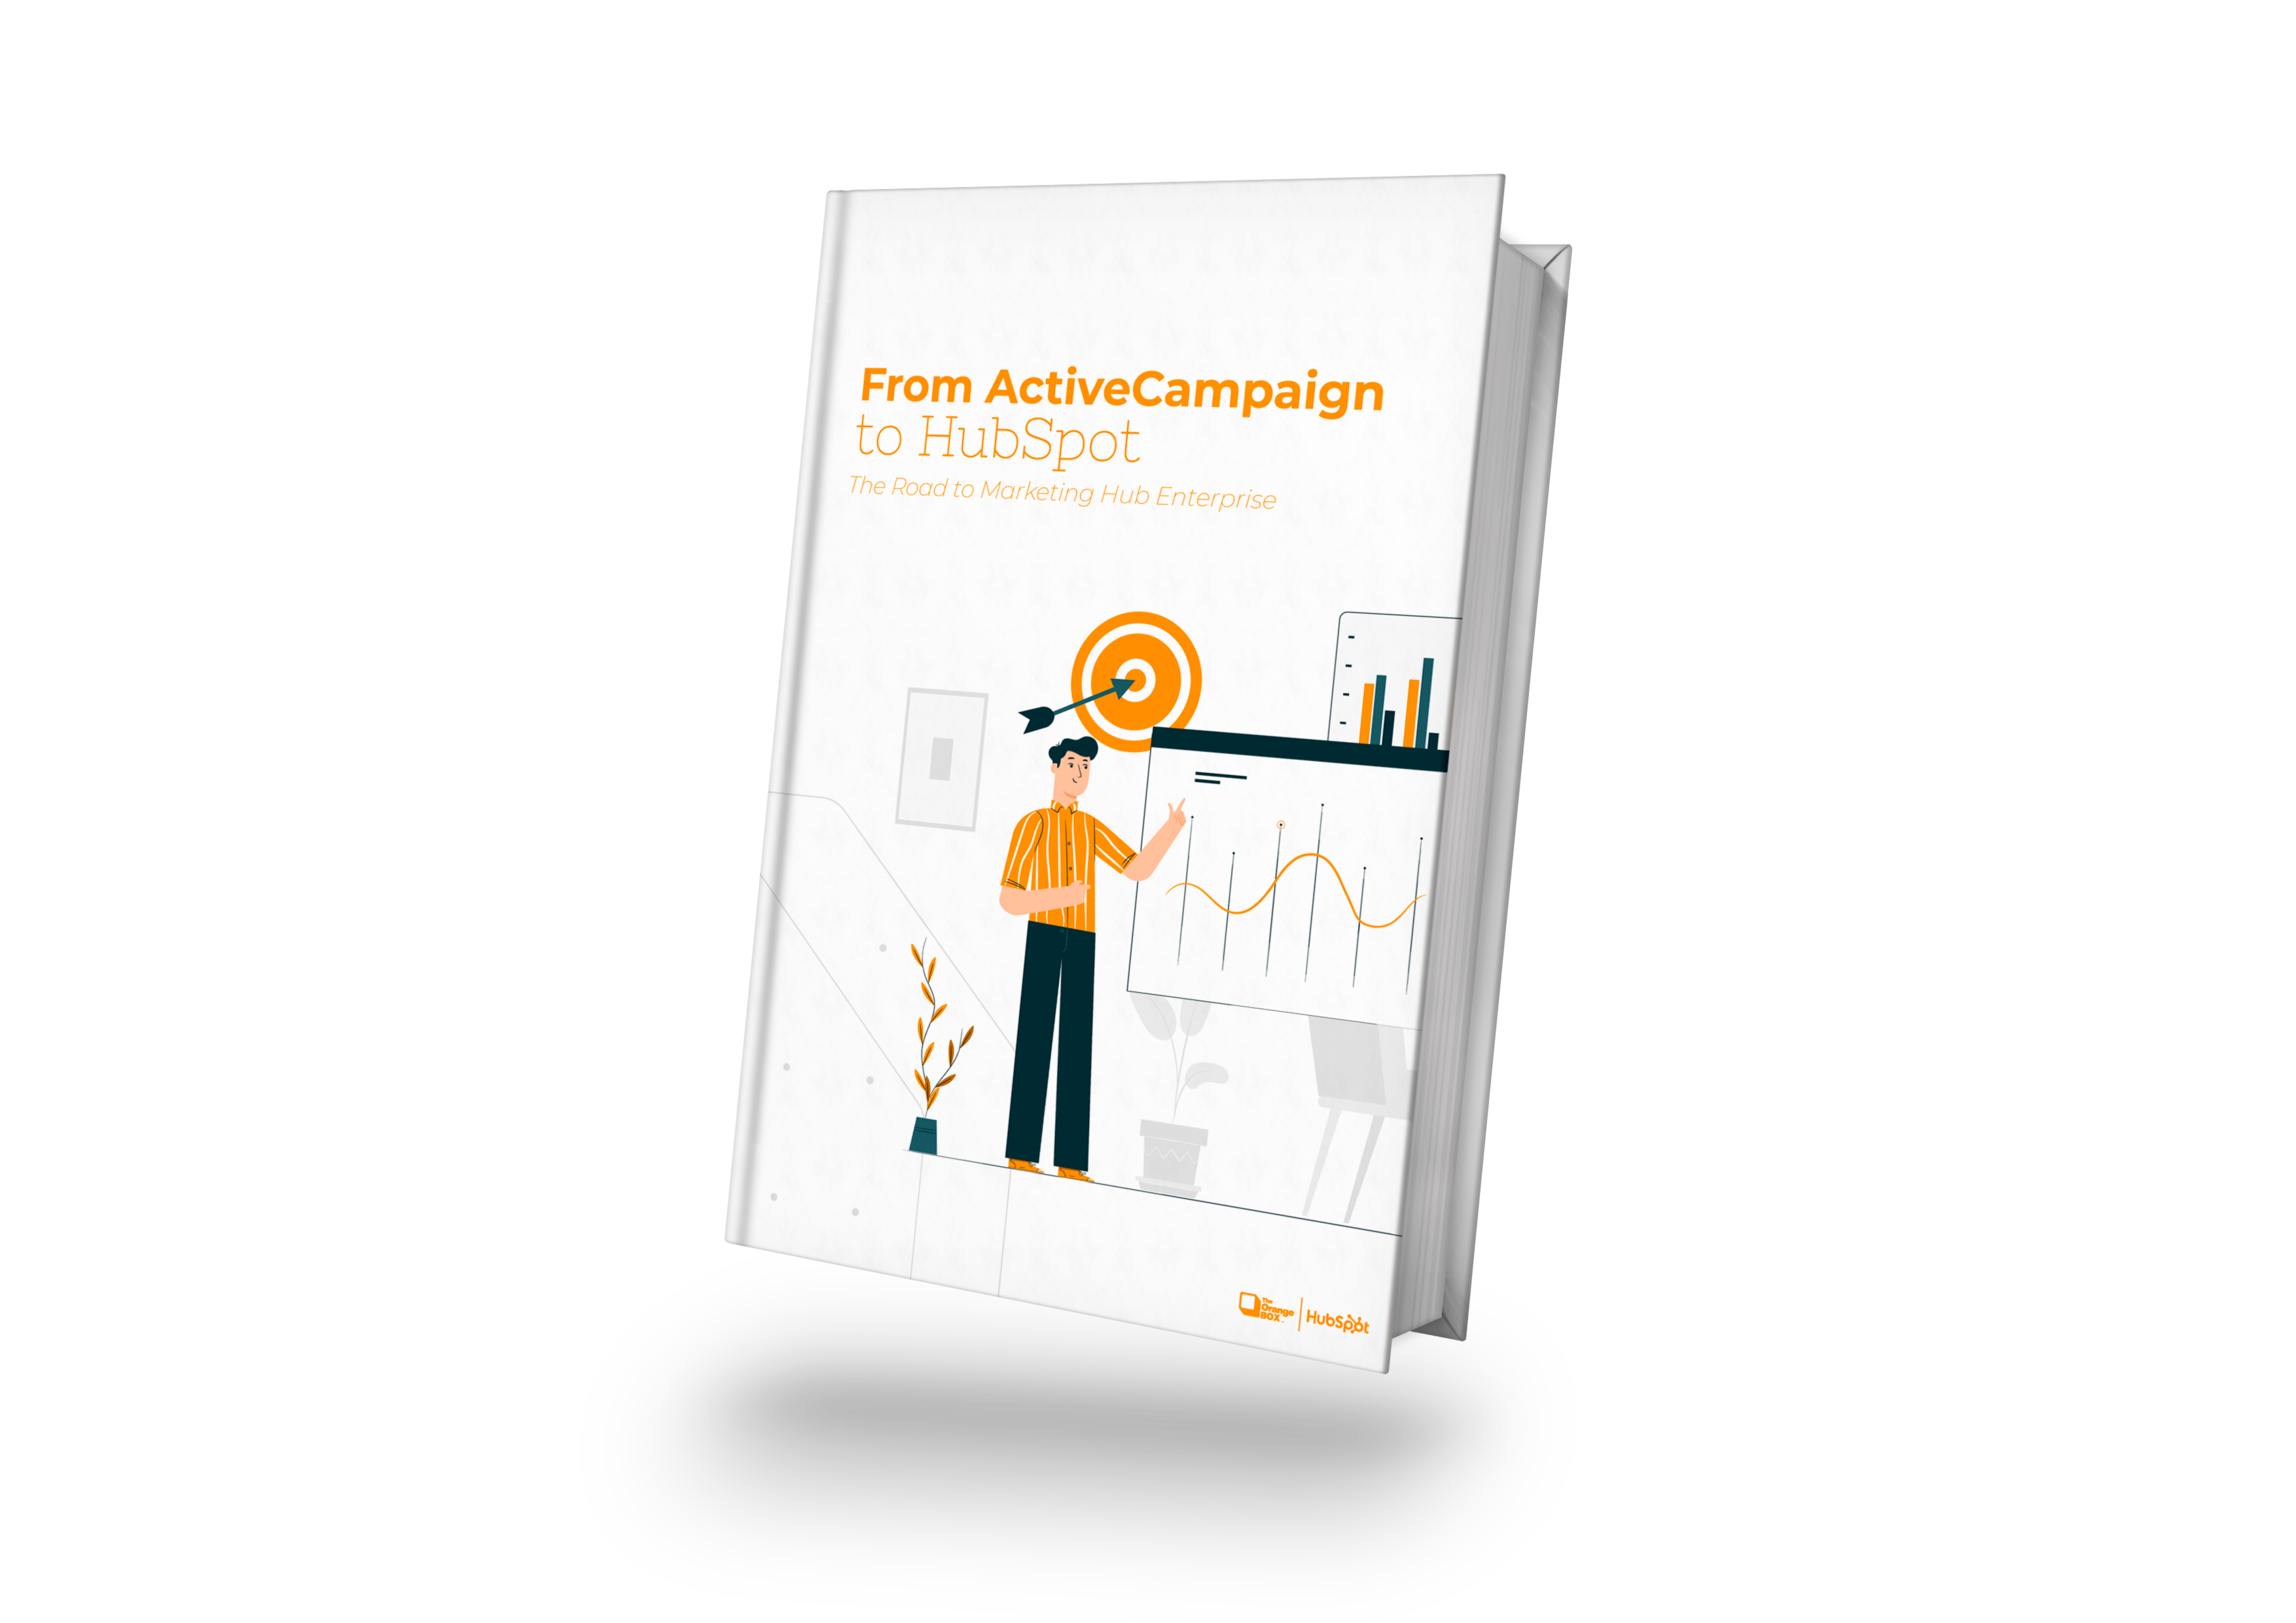 Hubspot Marketing Hub Campaign from ActiveCampaign to HubSpot